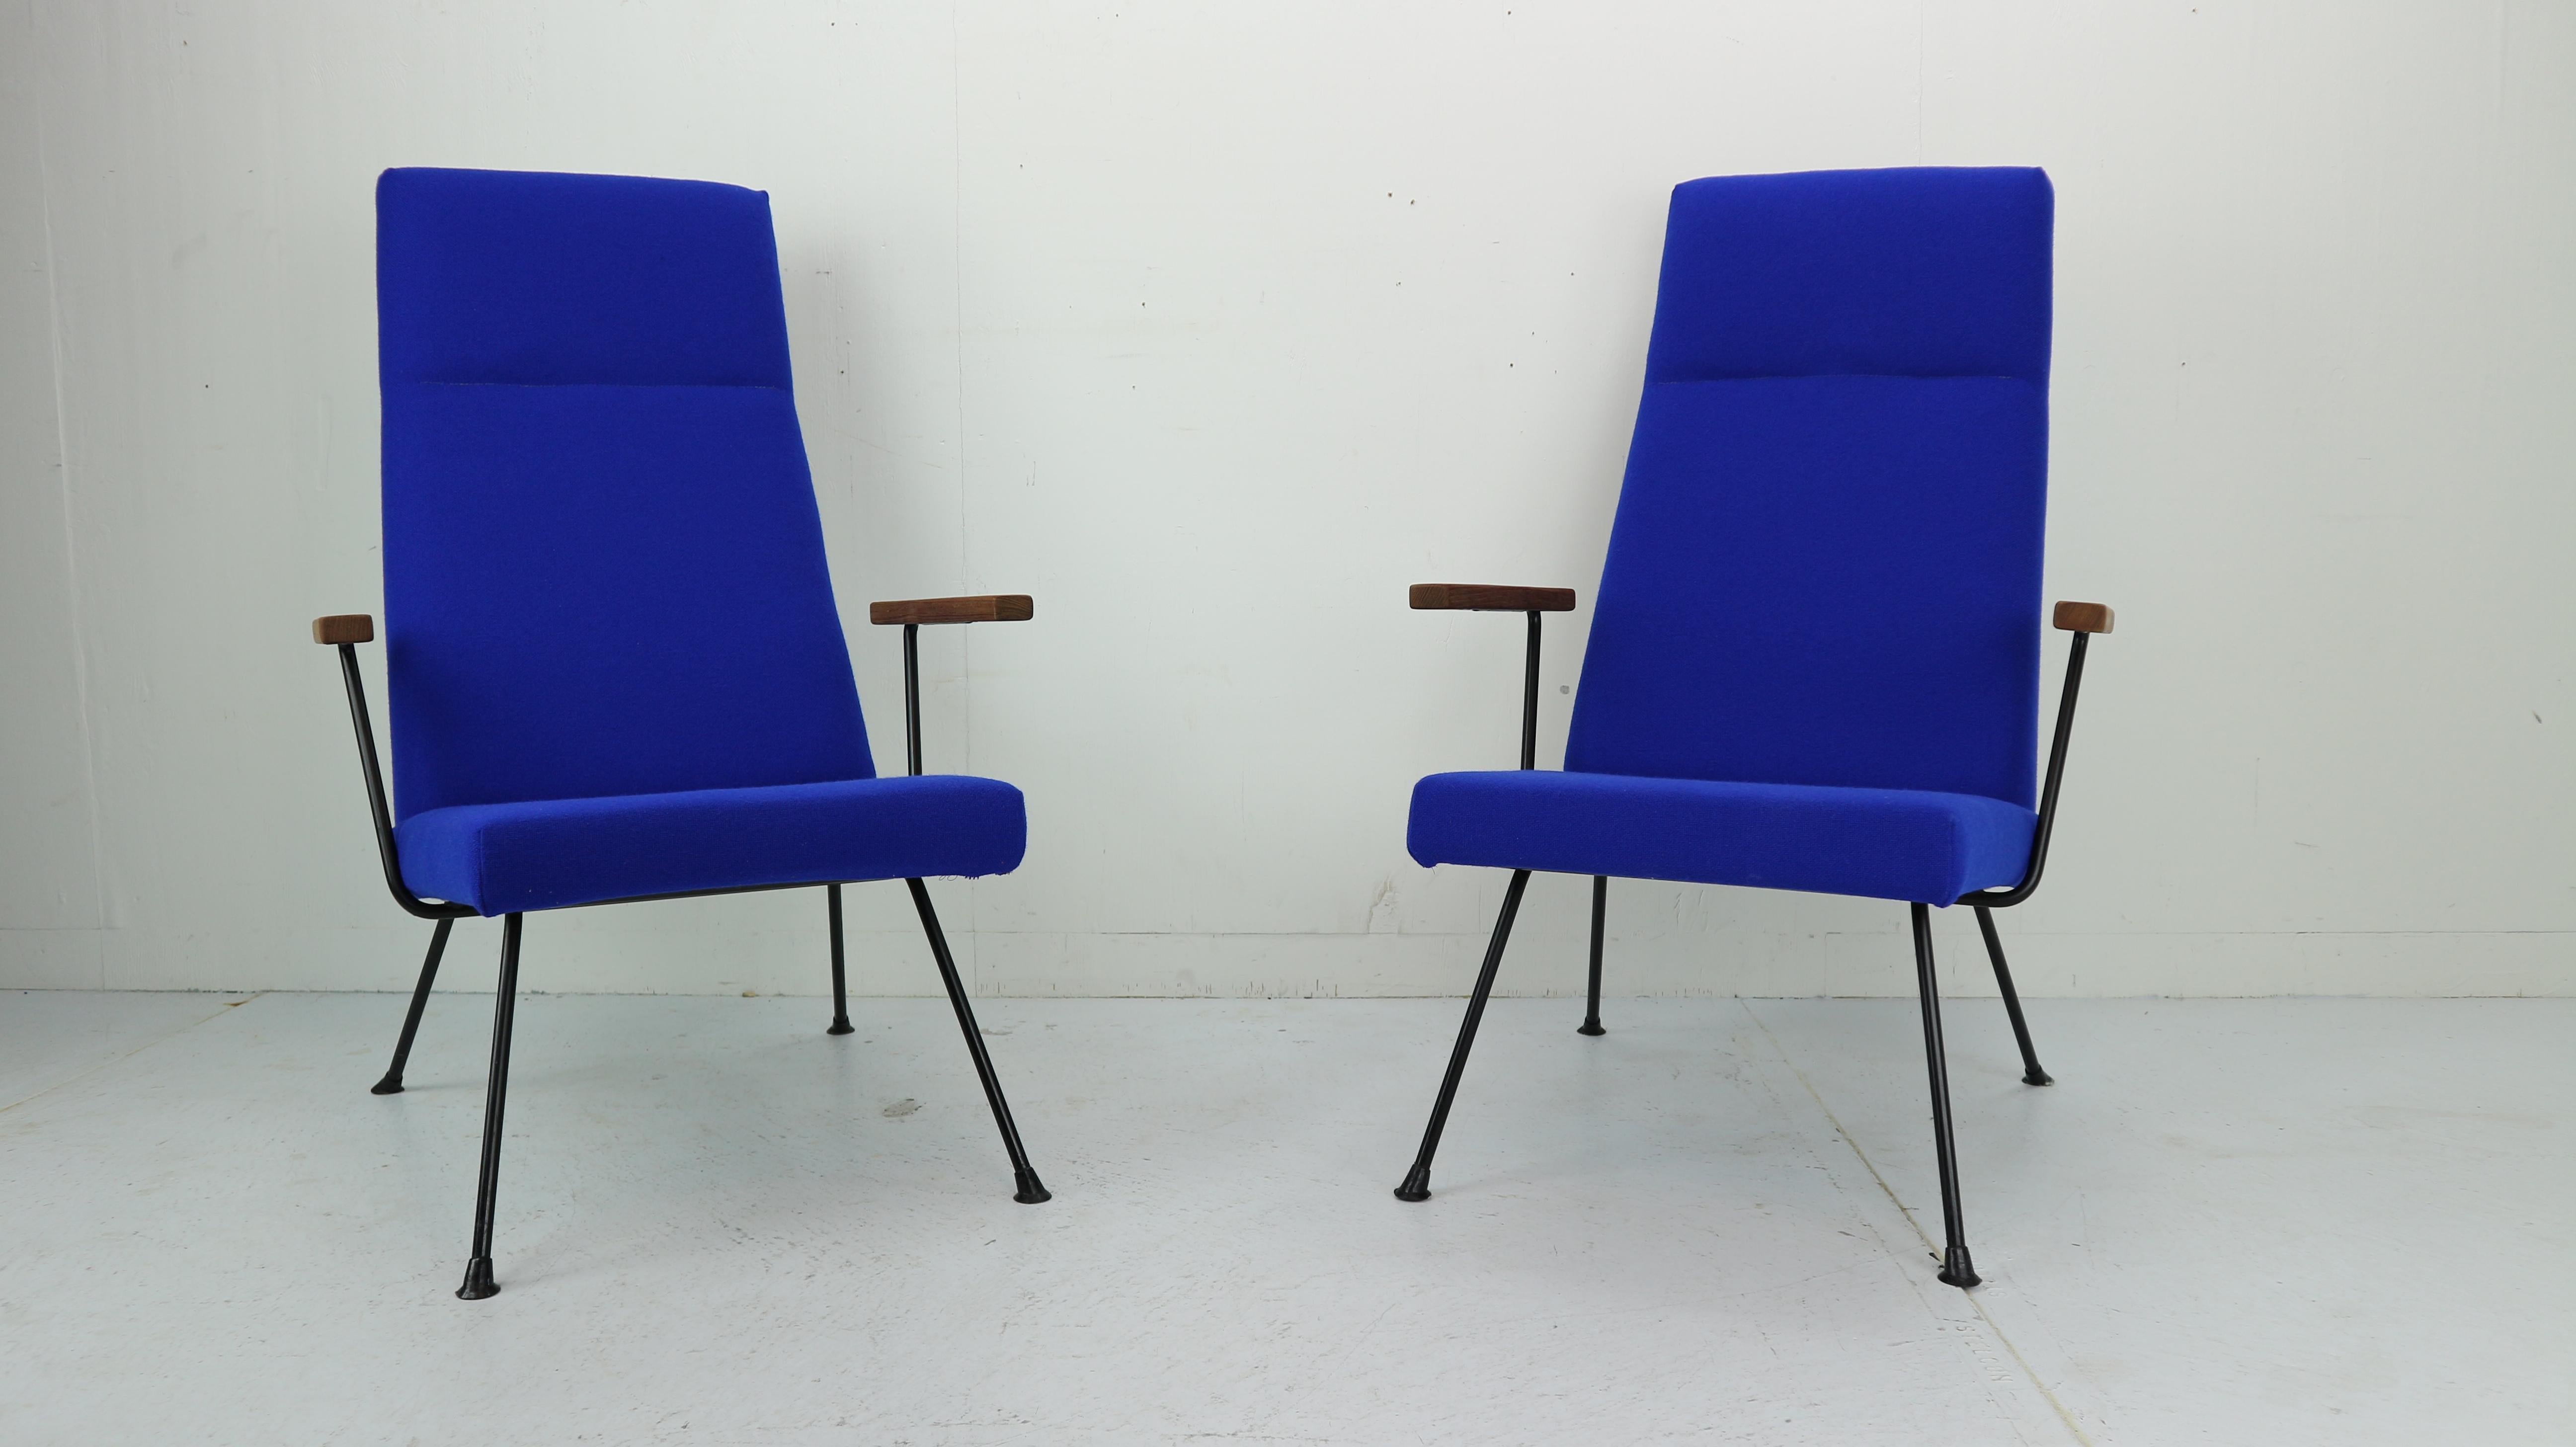 Metal Set of Two A.R. Cordemeyer Lounge Chair Model 1410 by Gispen, 1959